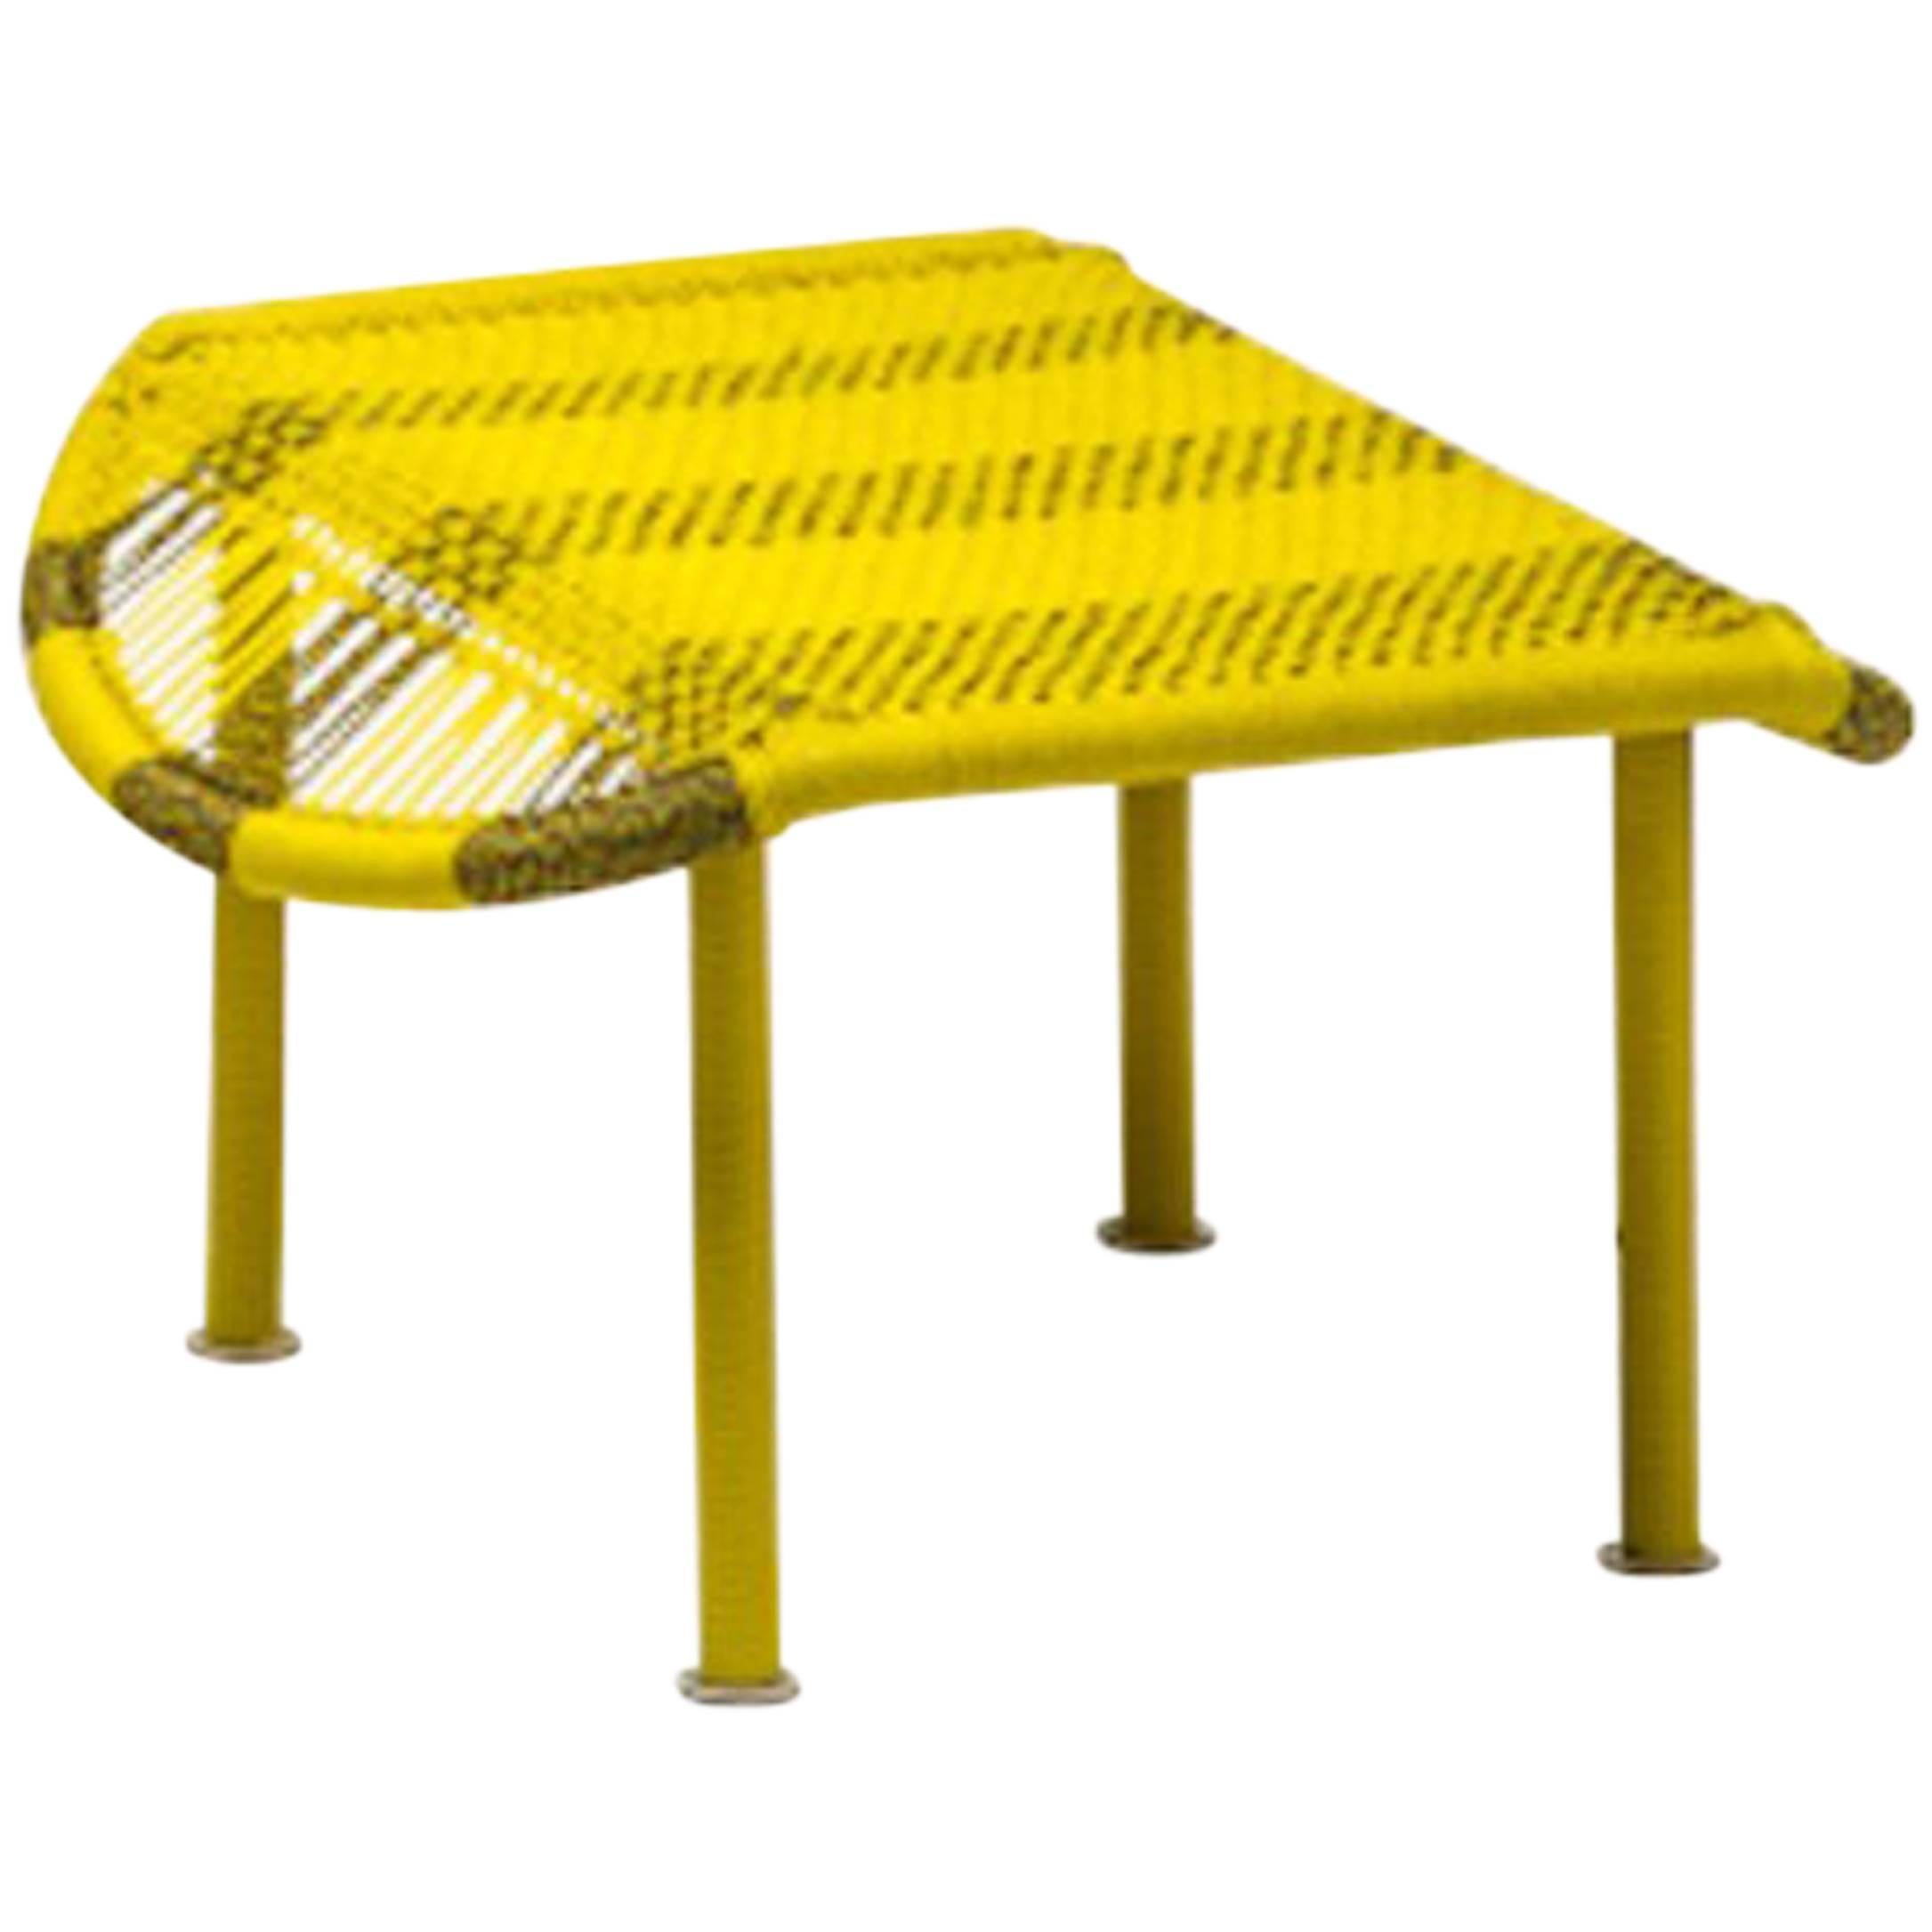 Imba Stool by Moroso for Indoor and Outdoor Use For Sale